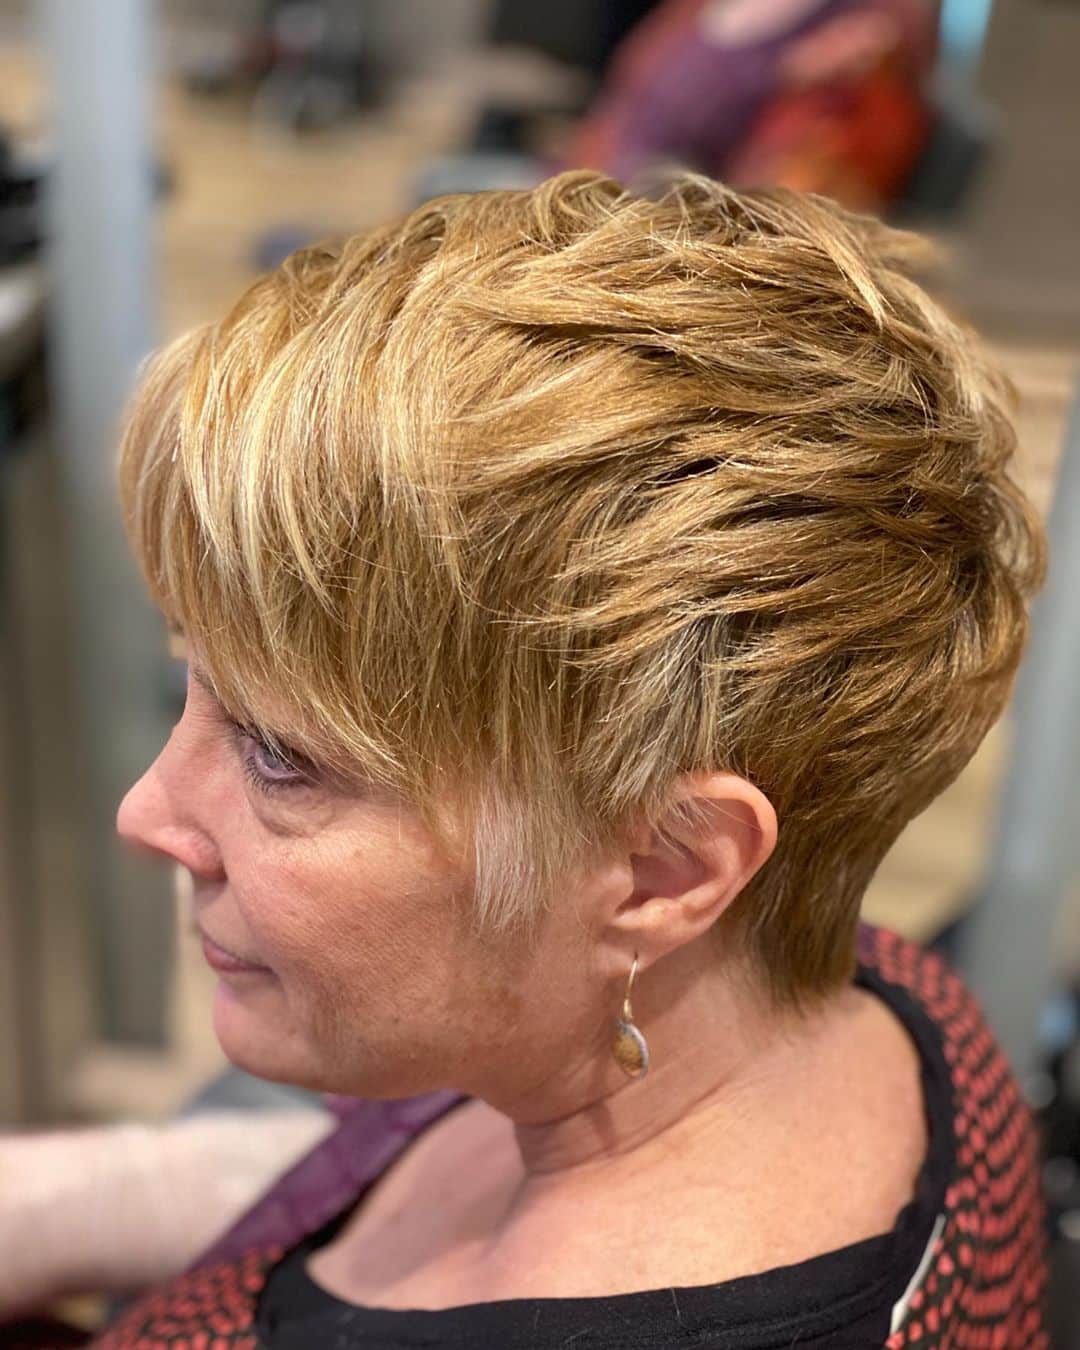 15 Easiest Wash and Wear Haircuts for Women Over 50